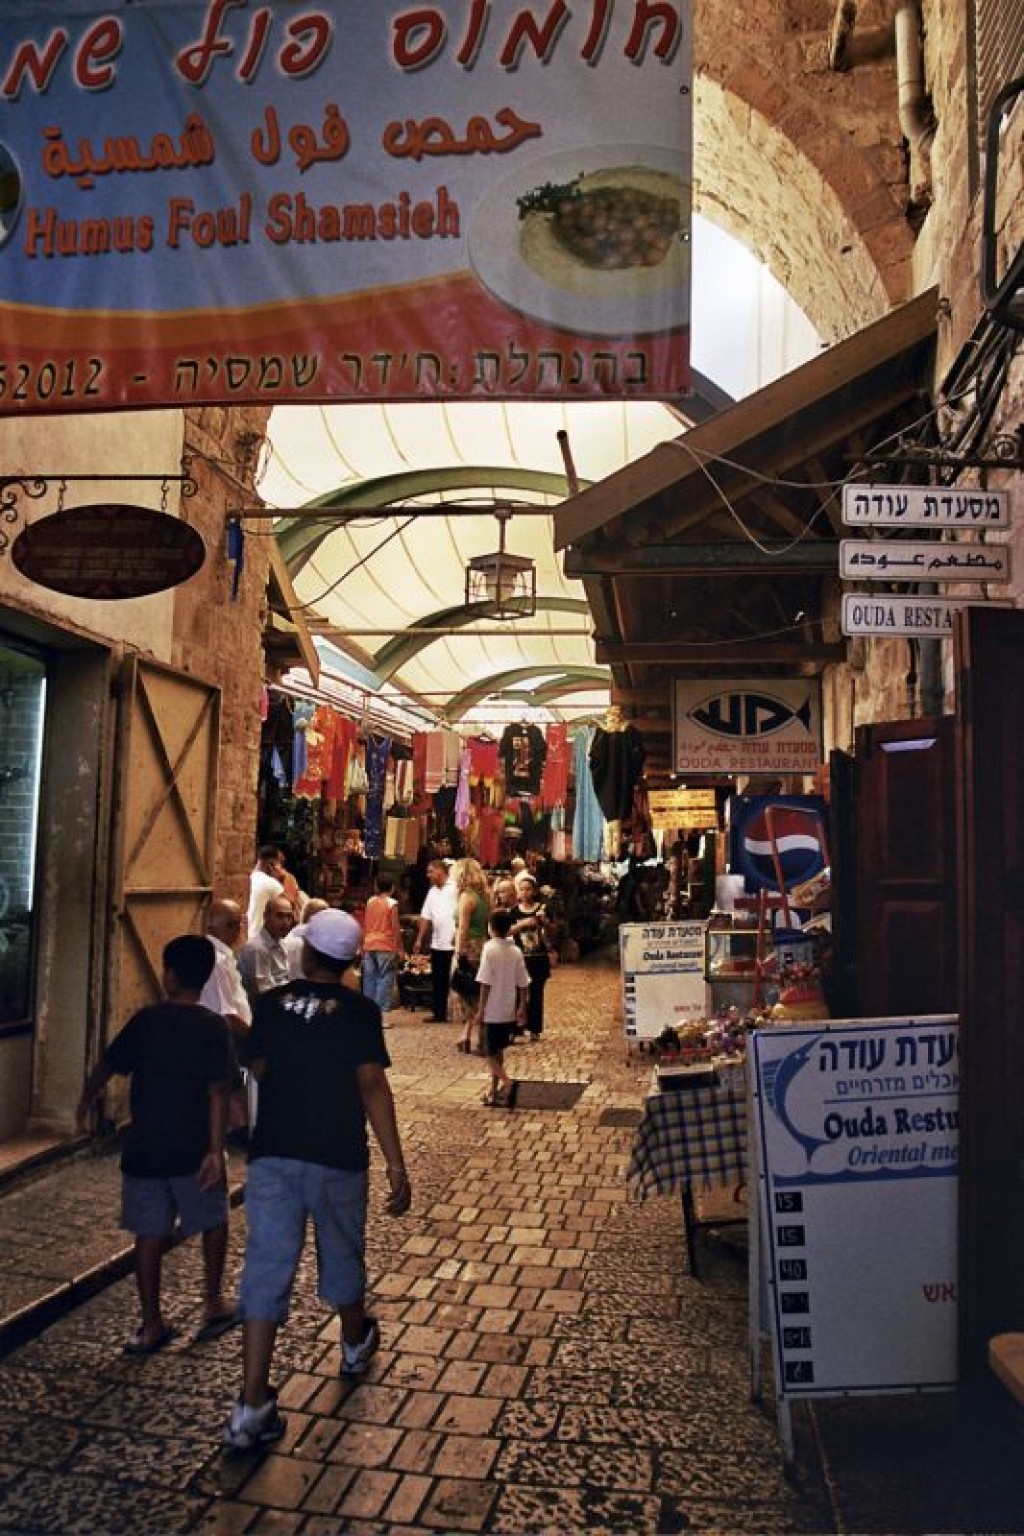 Walking through the streets of the old city of Akko.